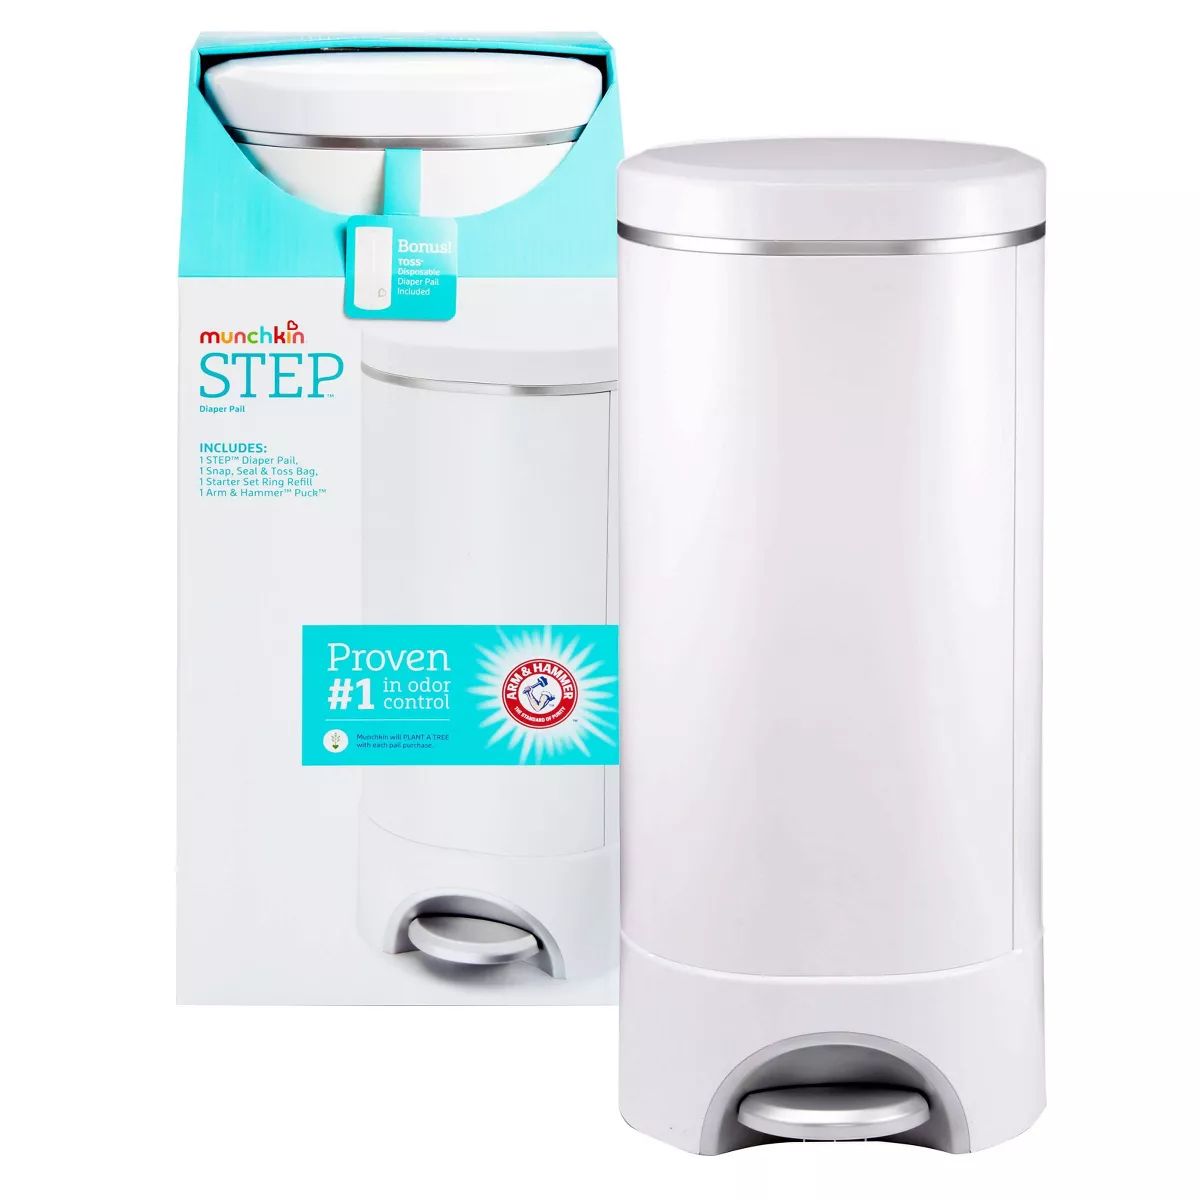 Munchkin STEP Diaper Pail, Powered by Arm & Hammer | Target